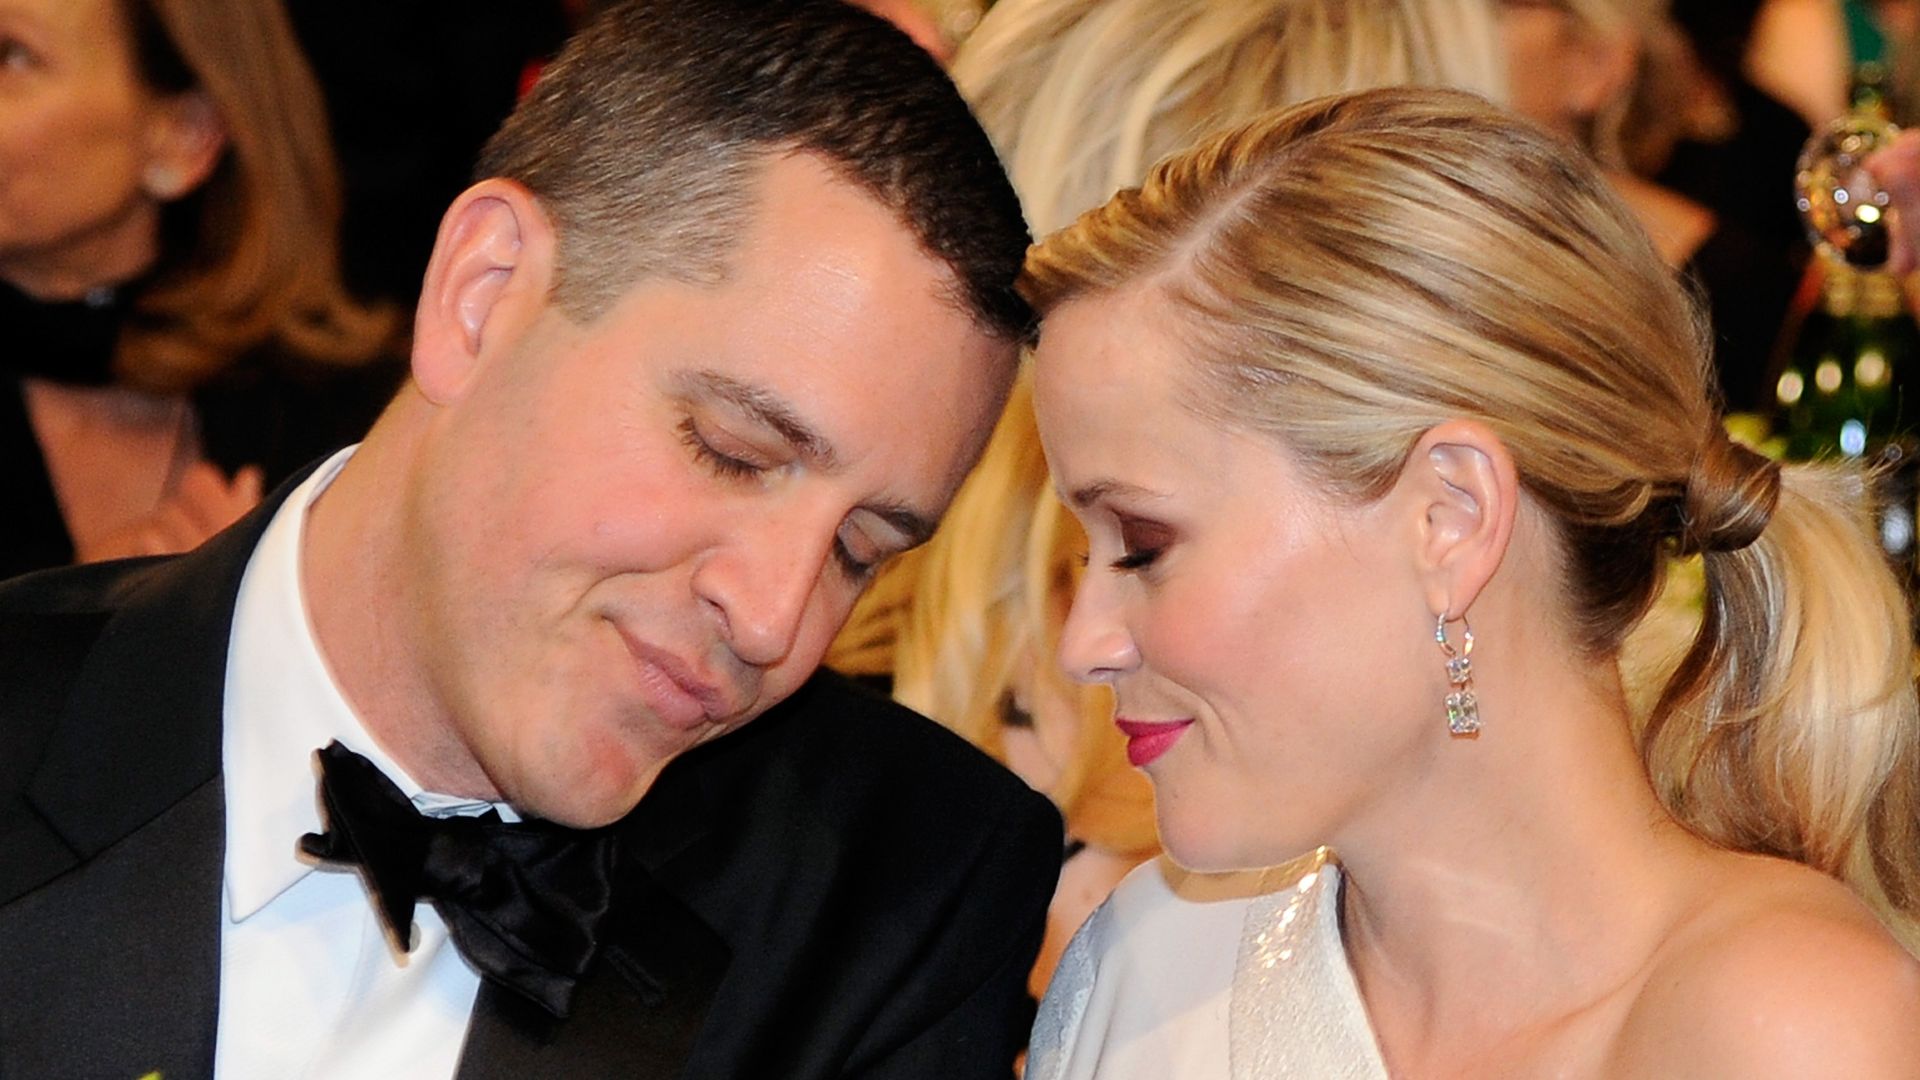 Reese Witherspoon and Jim Toth touching heads